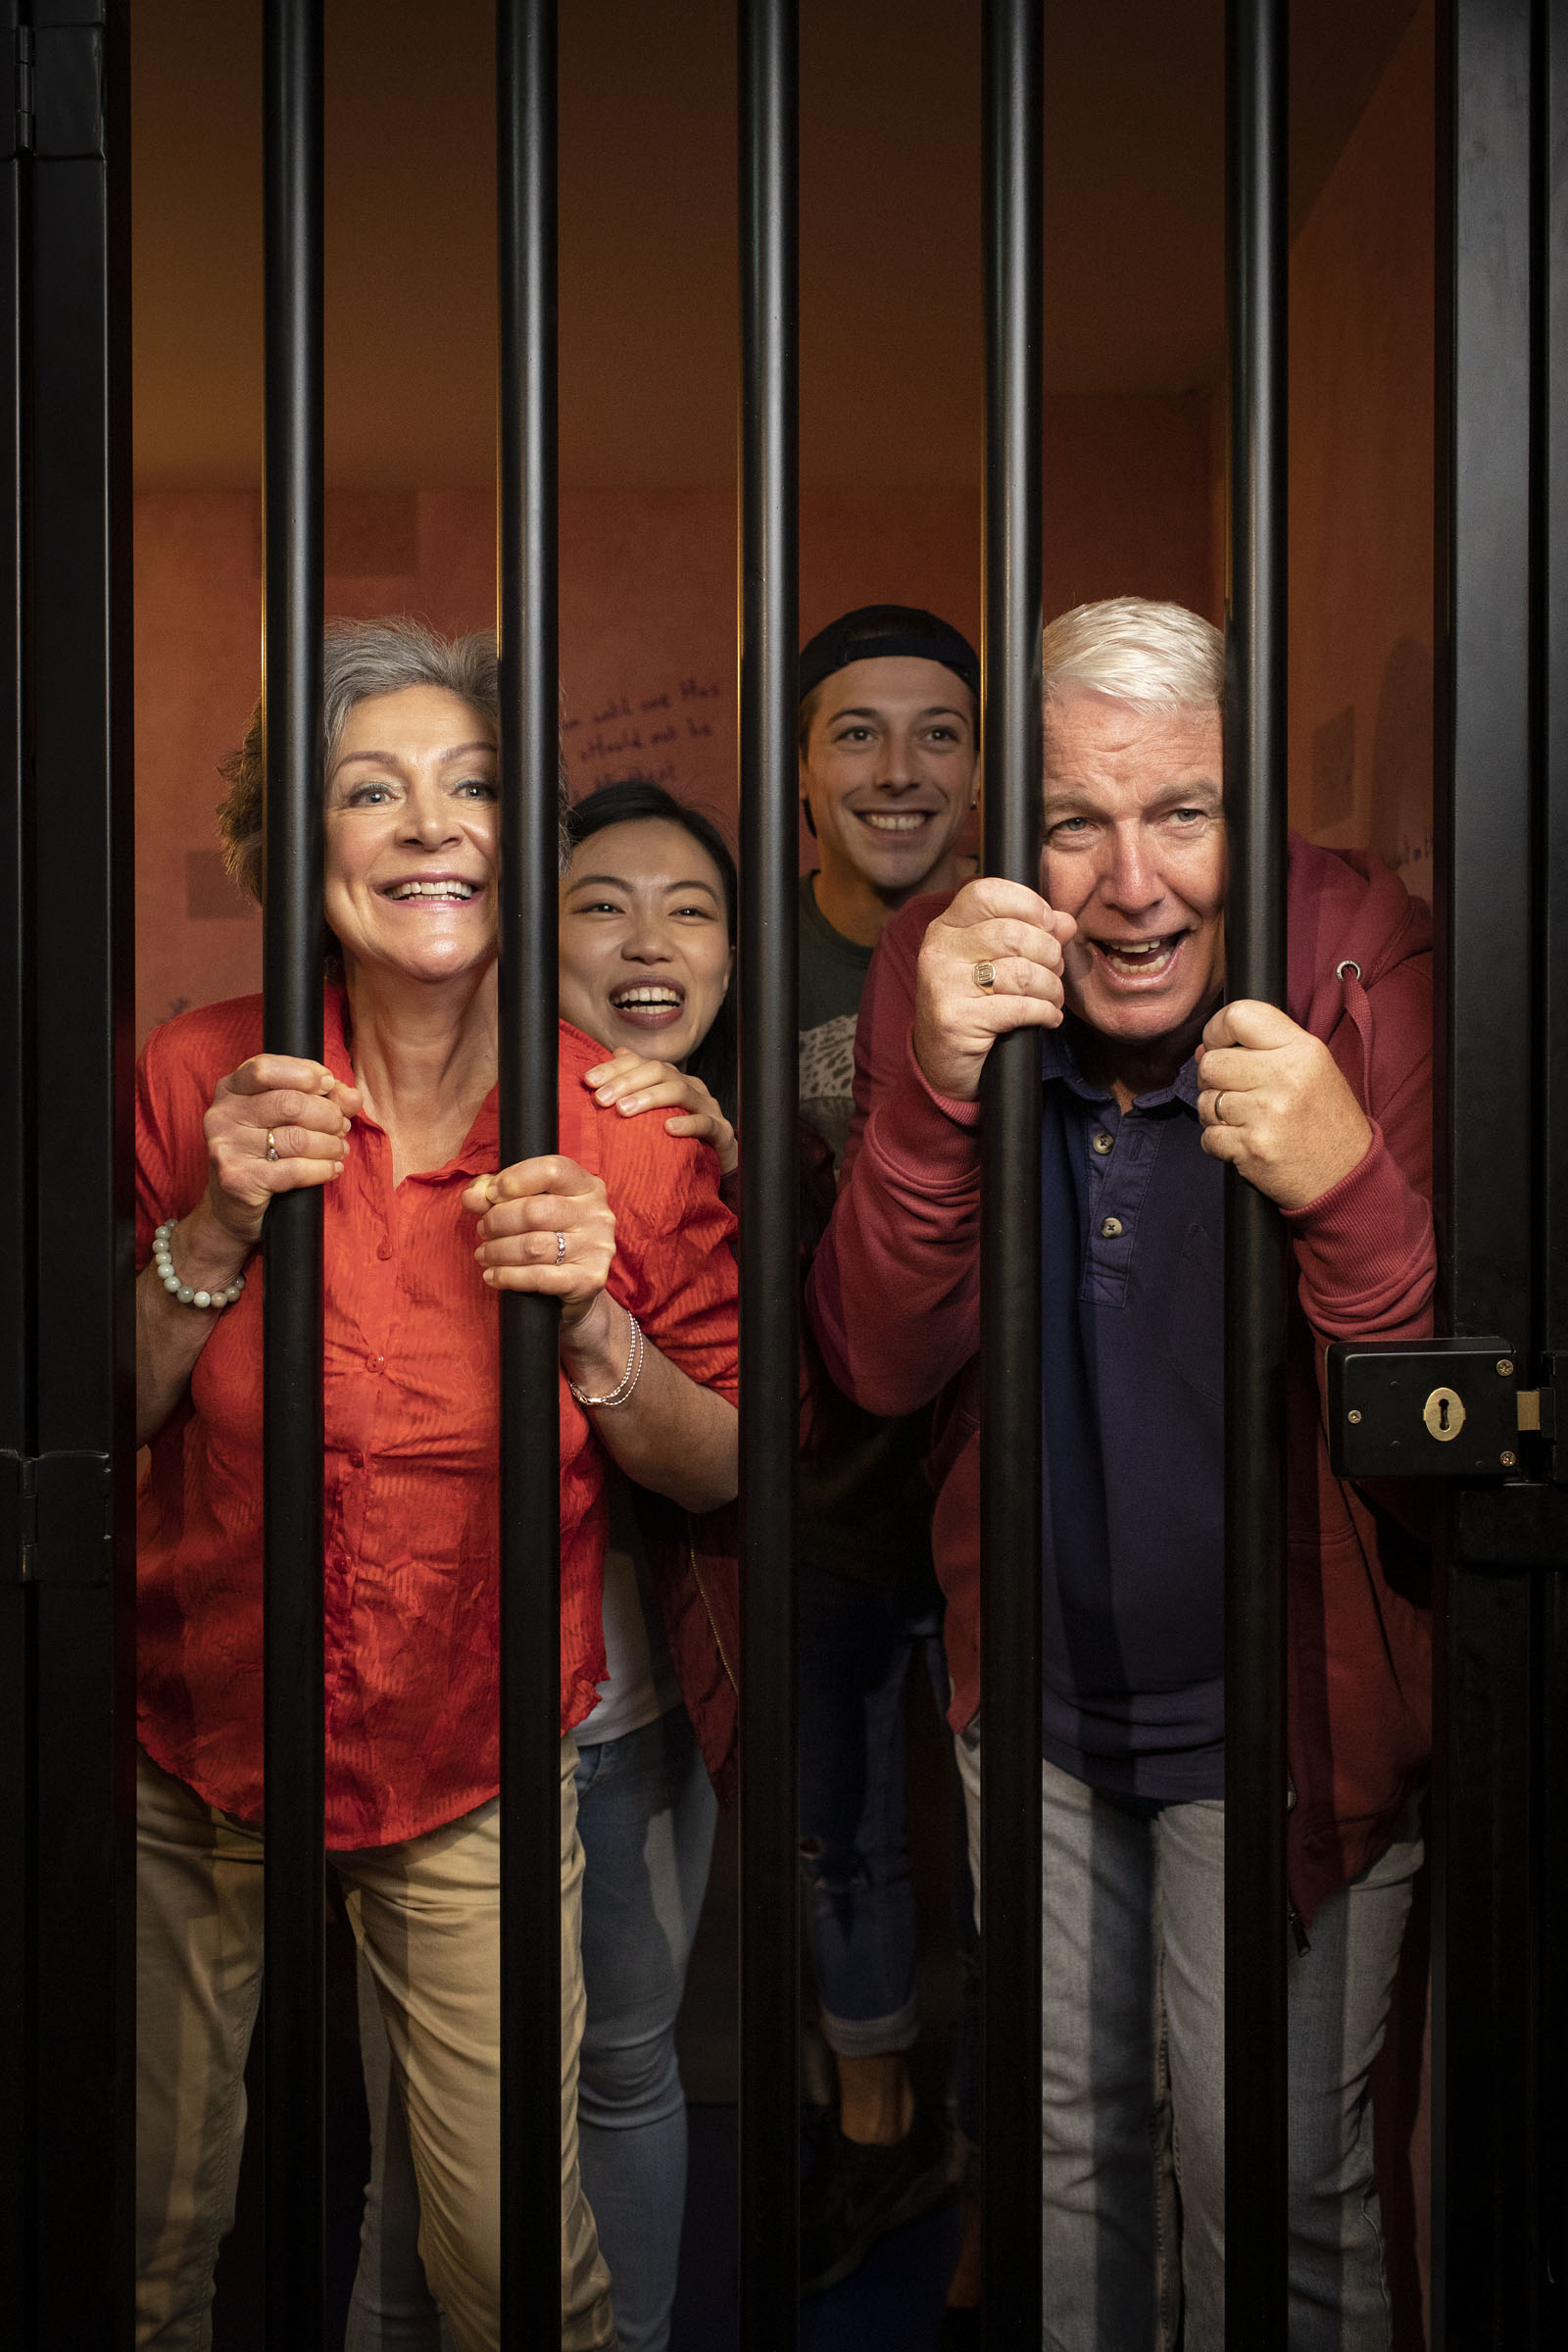 People behind bars at Monopoly Lifesized.